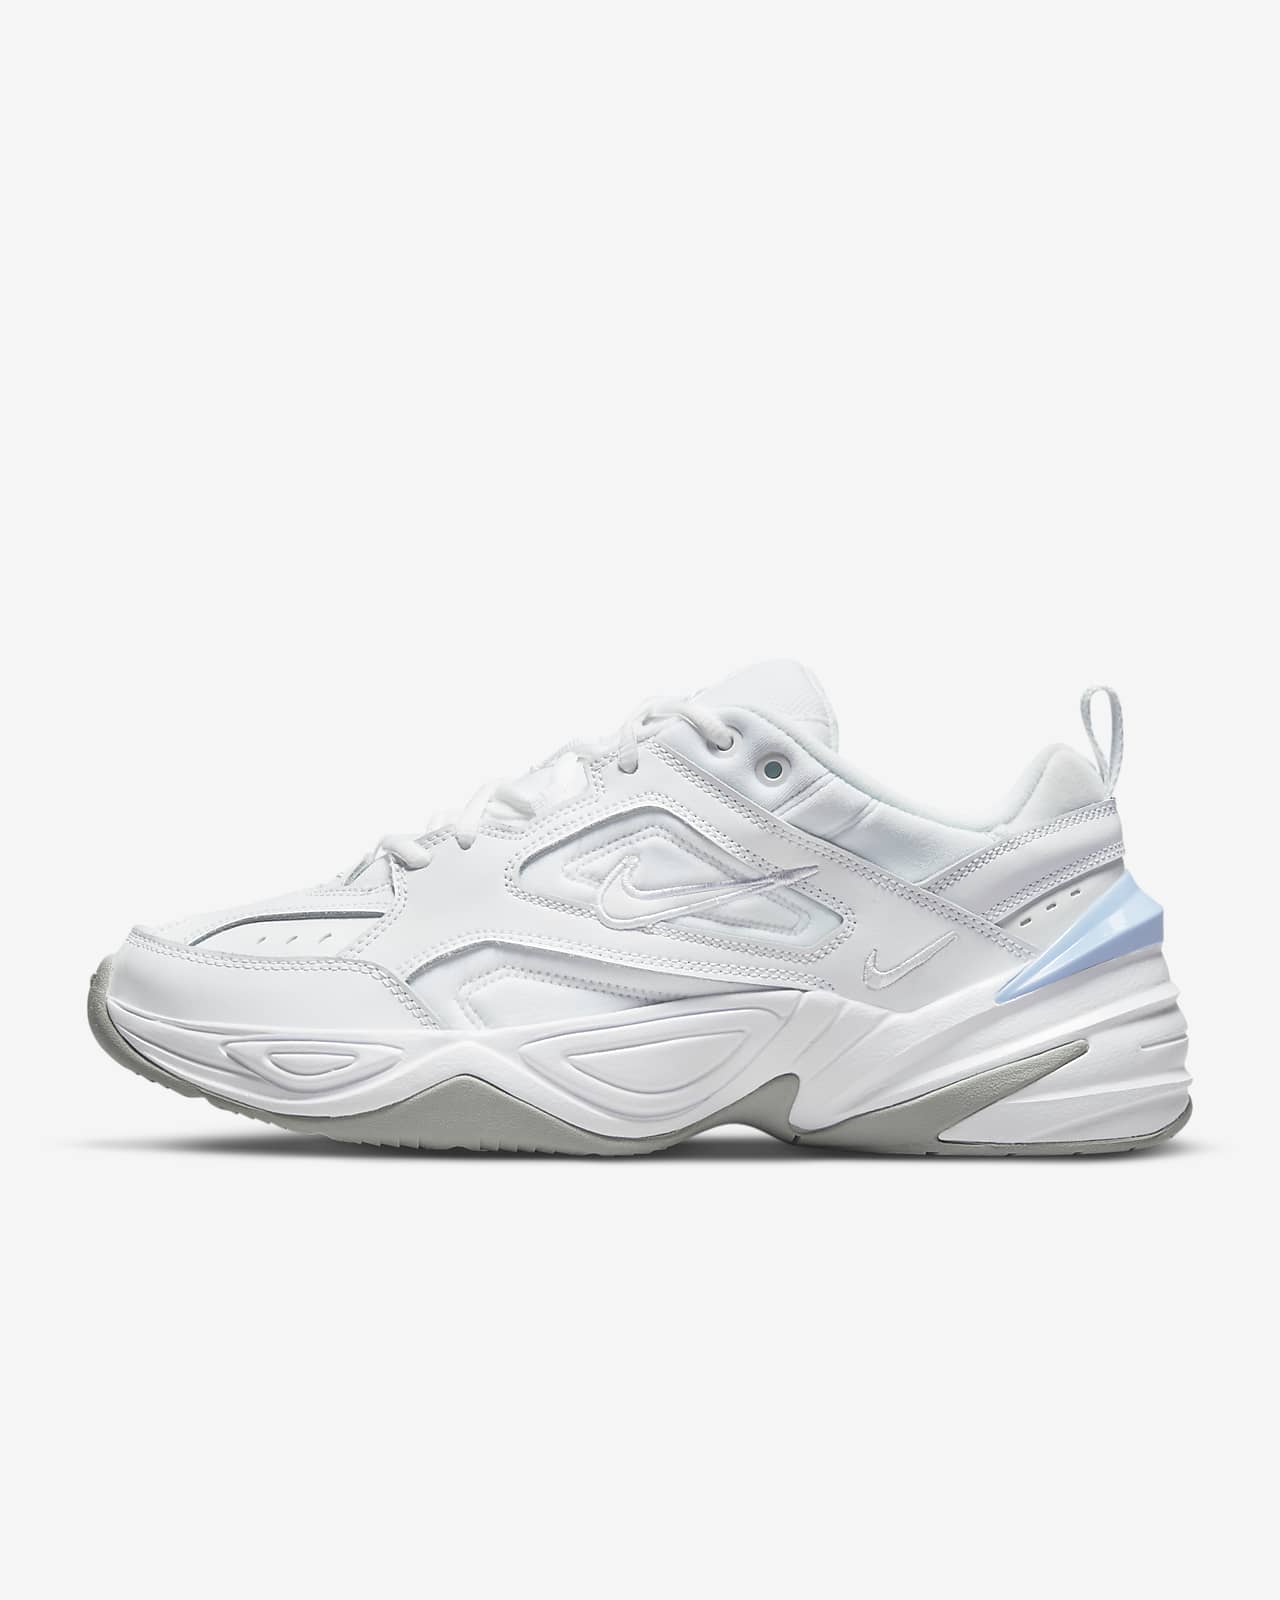 Chaussure Nike M2K Tekno pour homme